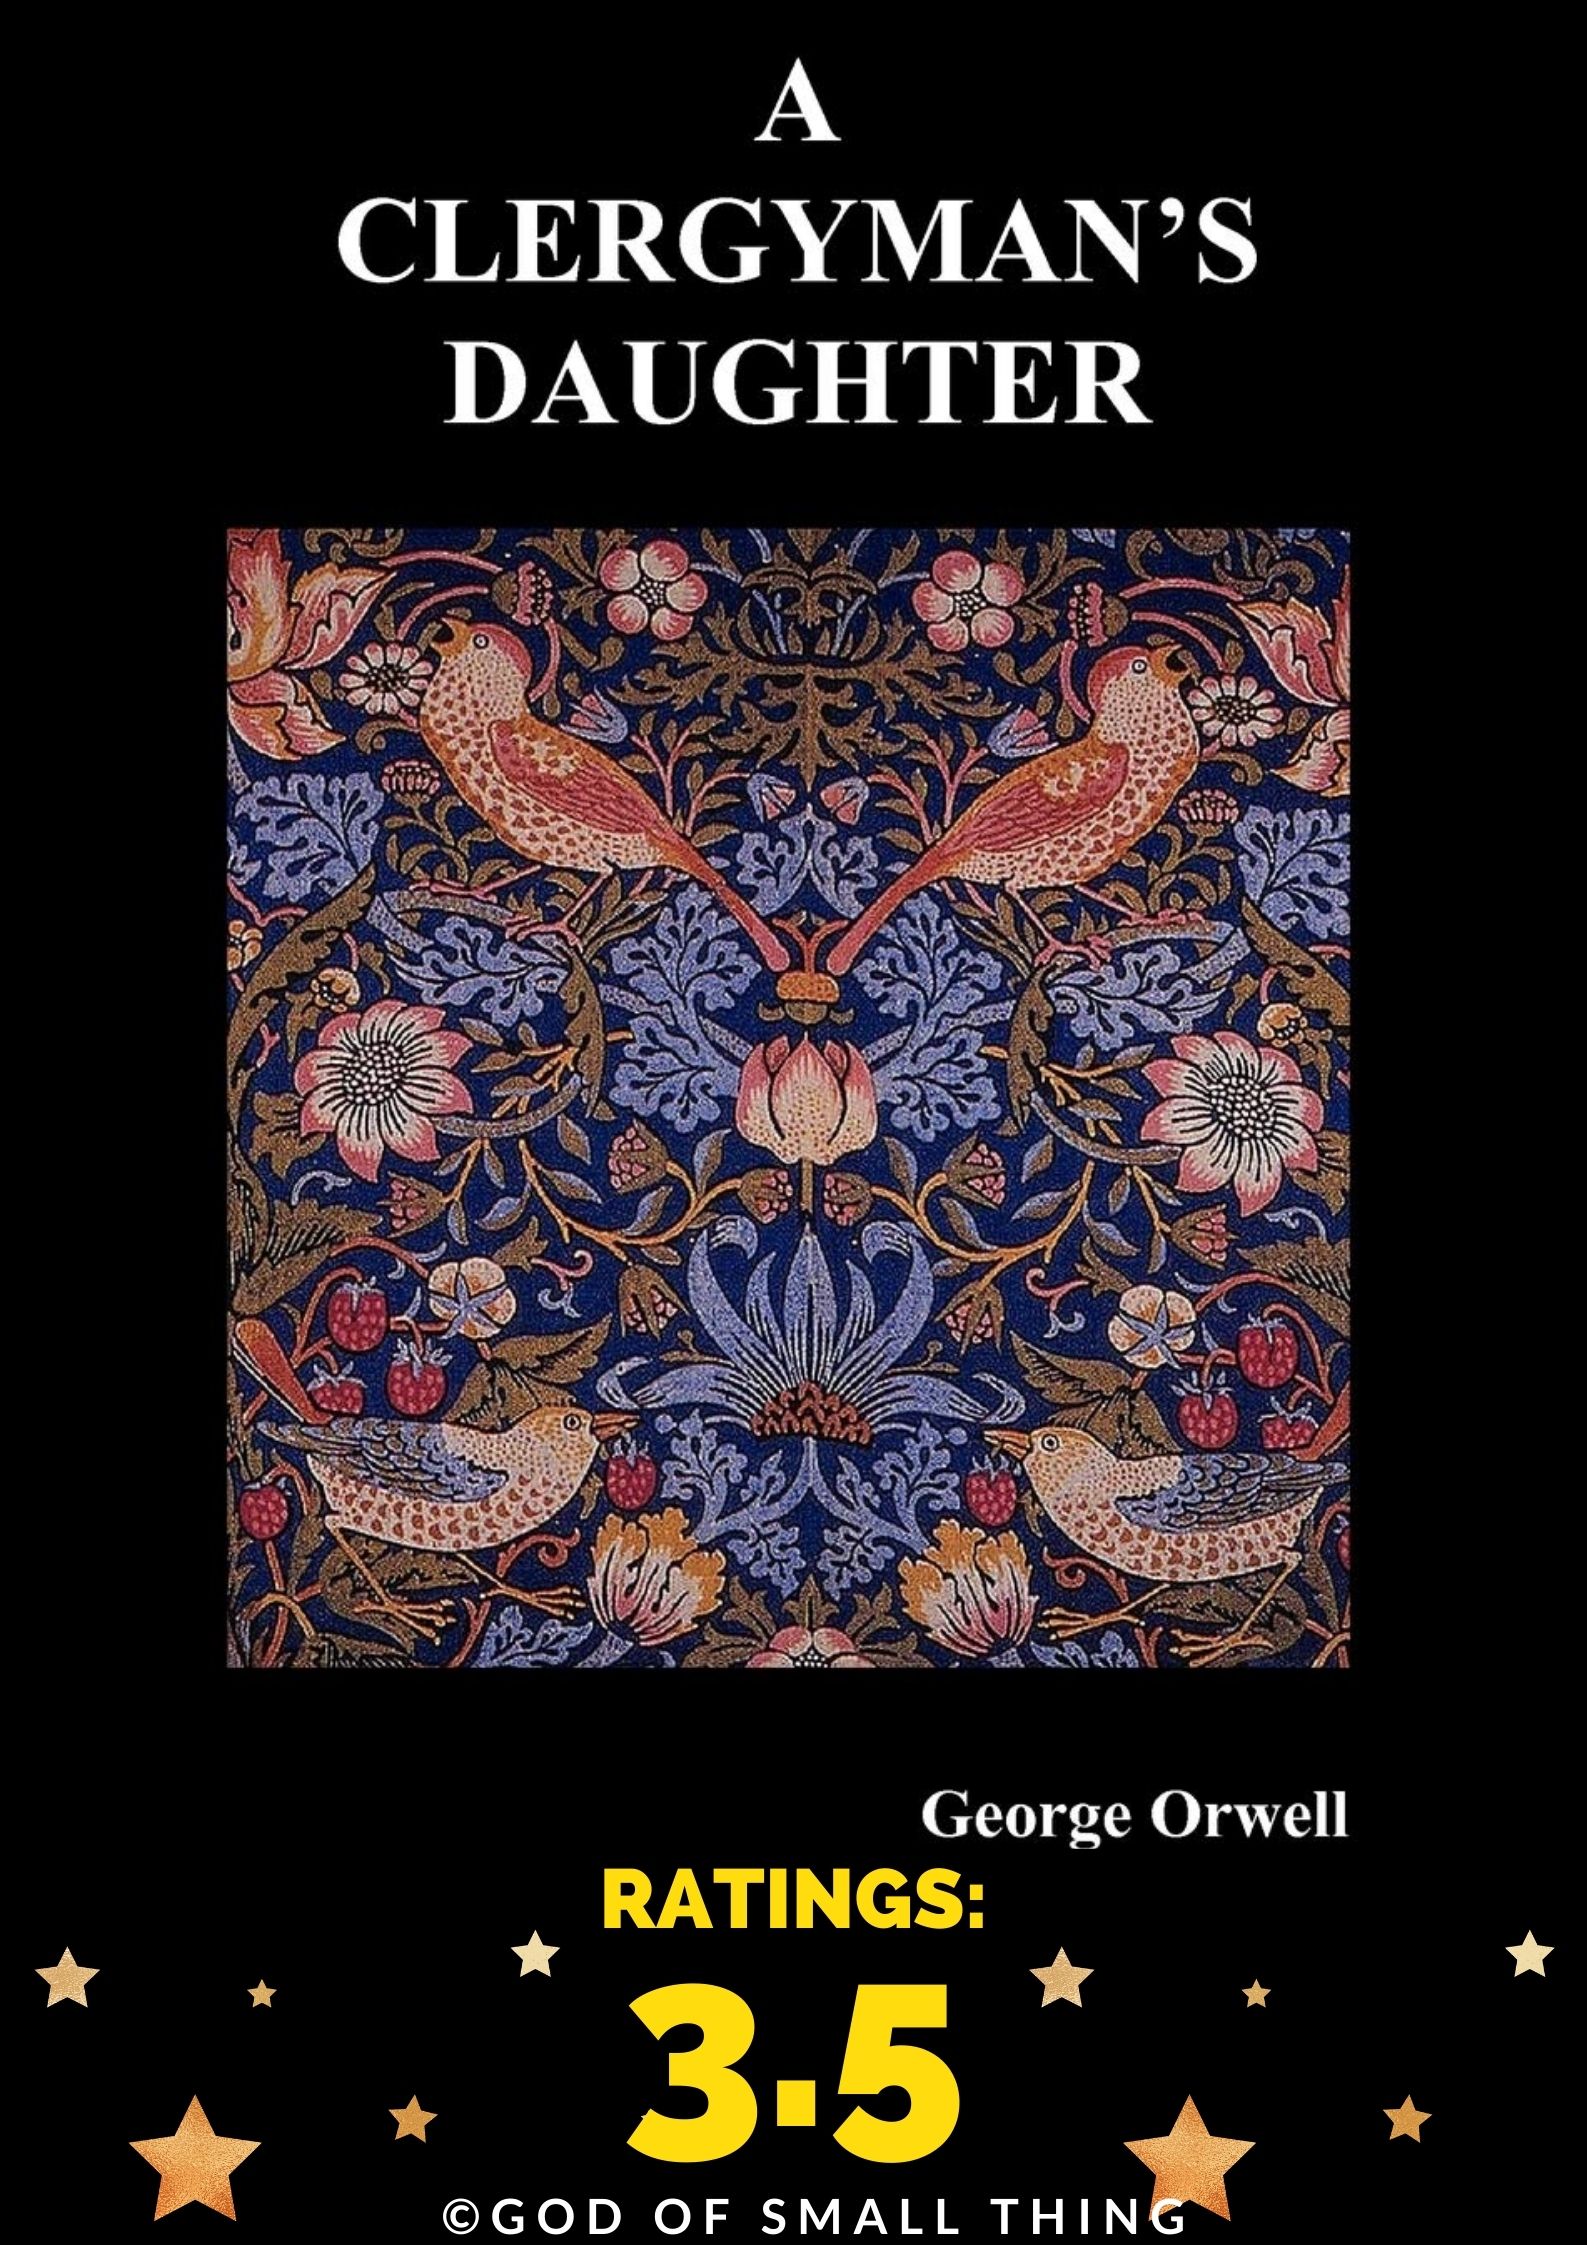 Best george orwell books A Clergyman’s Daughter by George Orwell